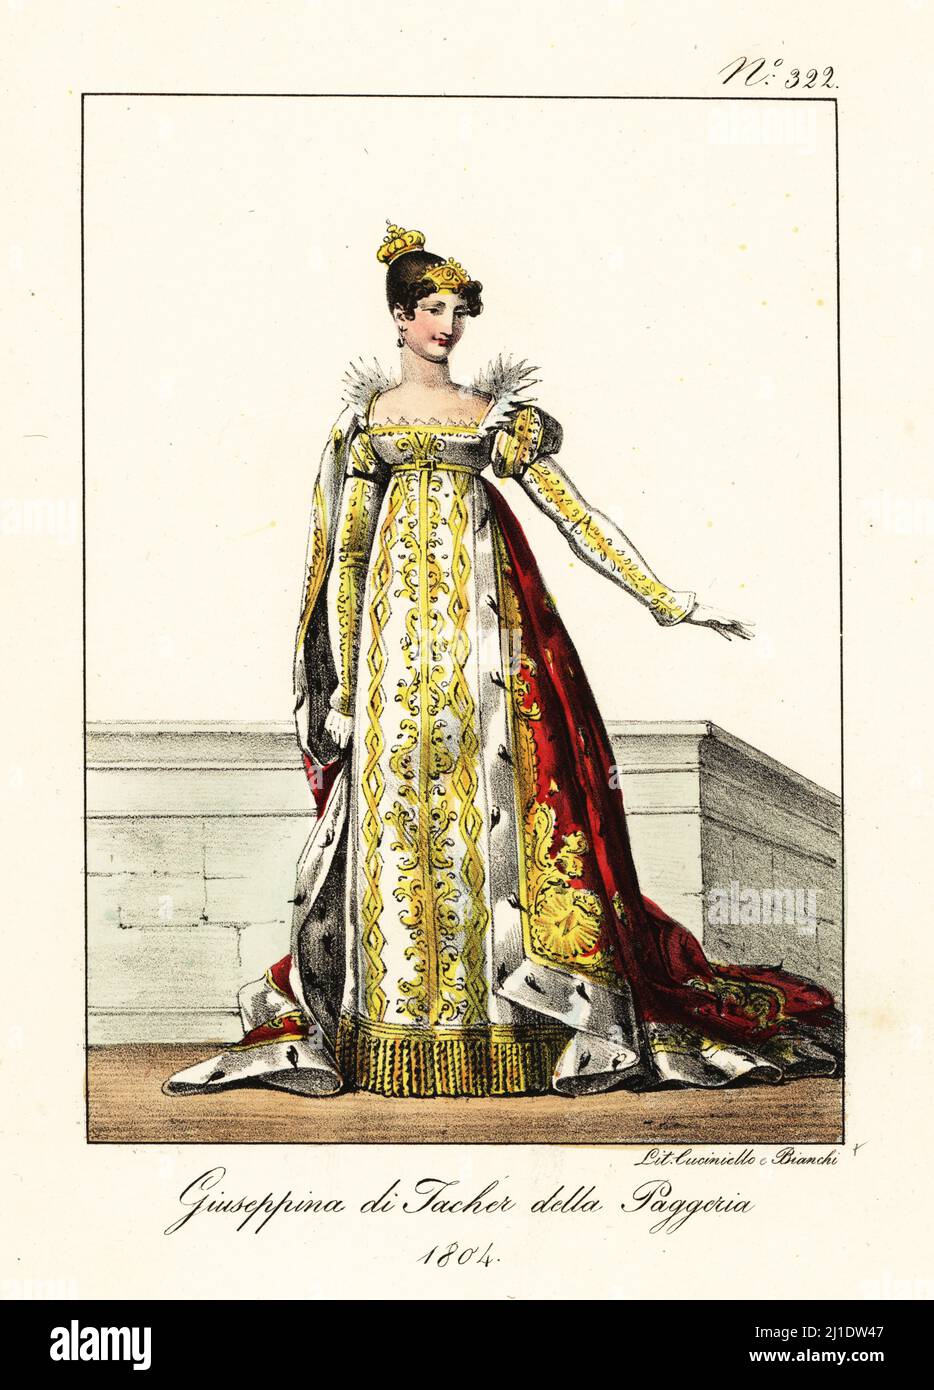 Empress Josephine of France in ceremonial robes at her coronation, 1804. Josephine Bonaparte, or Josephine de Beauharnais, 1763-1814. In gold crown, white and gold gown, scarlet cape with gold embroidery and ermine trim. Josephine de Tacher de la Pagerie, 1804. Handcoloured lithograph by Lorenzo Bianchi and Domenico Cuciniello after Hippolyte Lecomte from Costumi civili e militari della monarchia francese dal 1200 al 1820, Naples, 1825. Italian edition of Lecomte’s Civilian and military costumes of the French monarchy from 1200 to 1820. Stock Photo